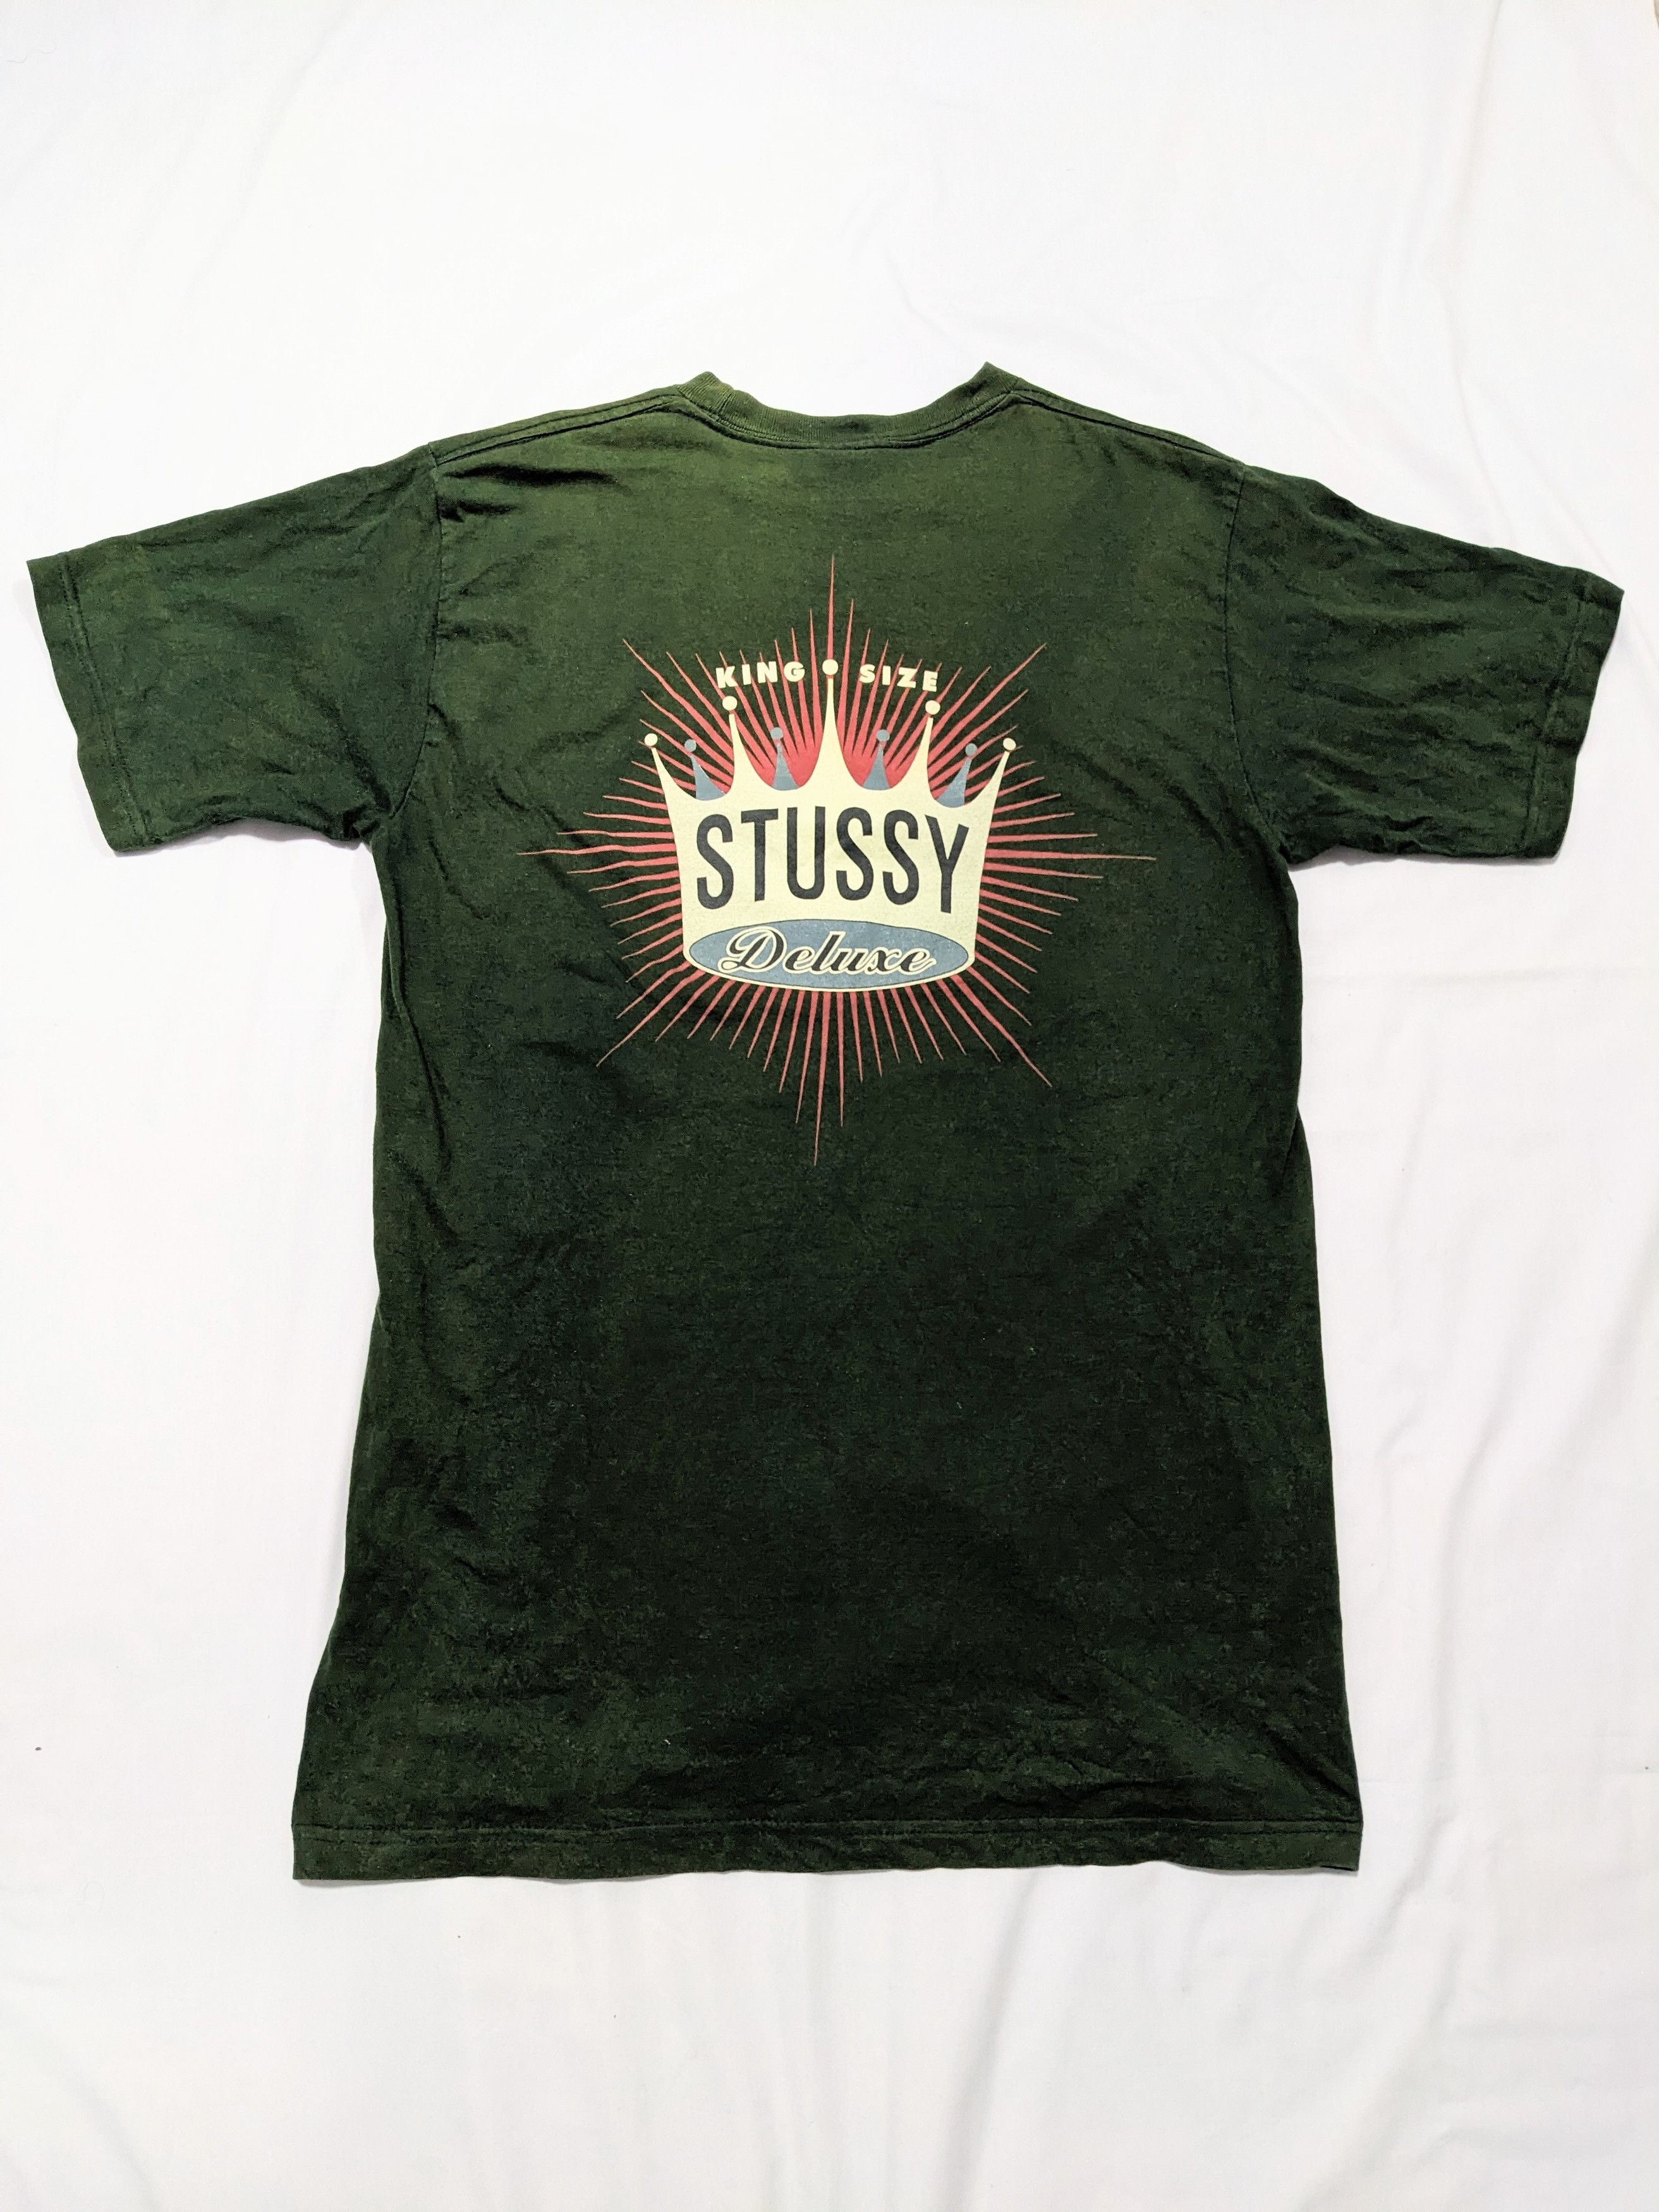 RARE Vintage 90s Stussy Deluxe Crown Center Logo Tee - 2